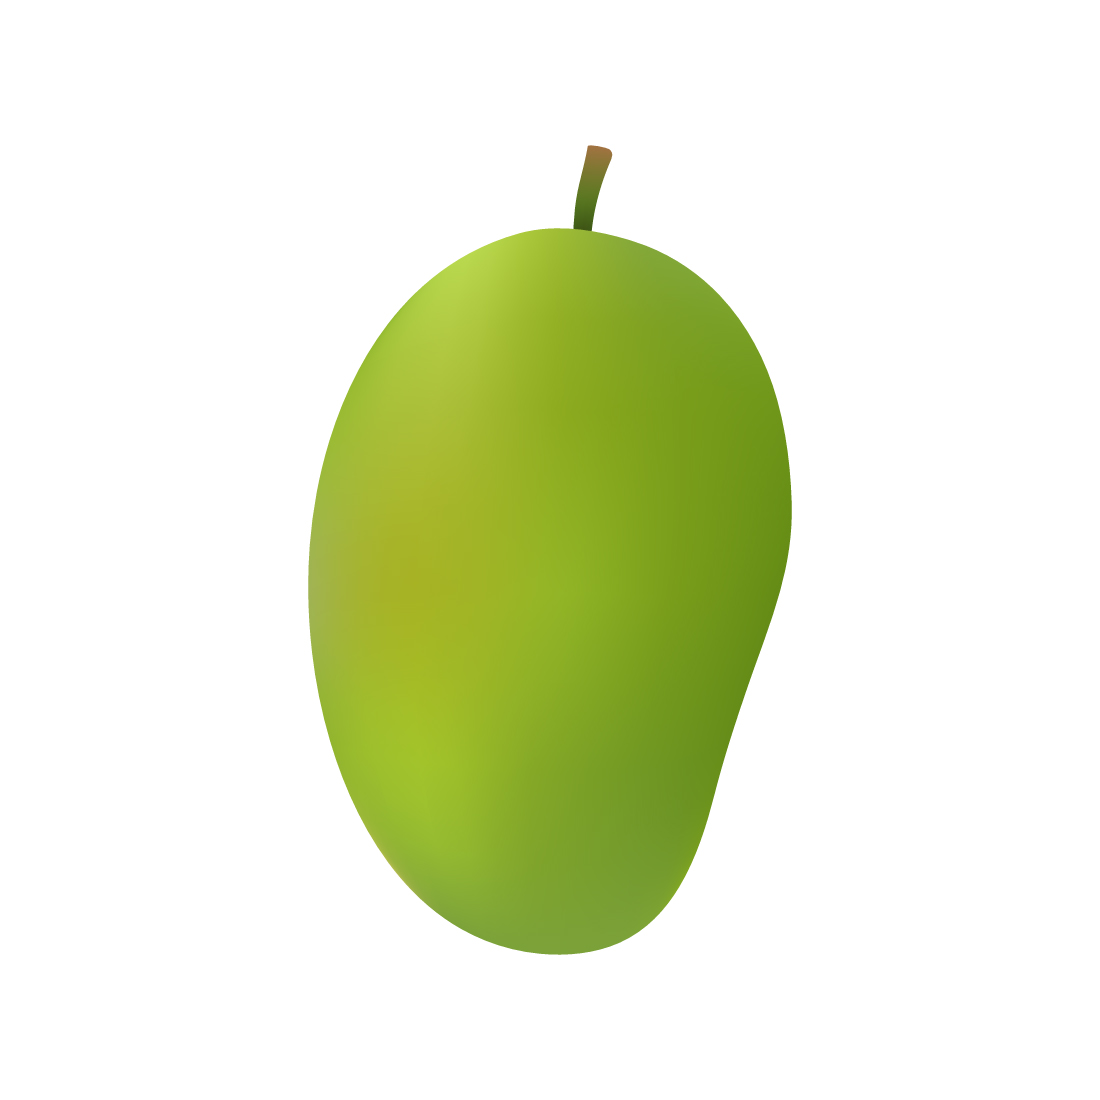 Green Mango Illustration On White Background preview image.